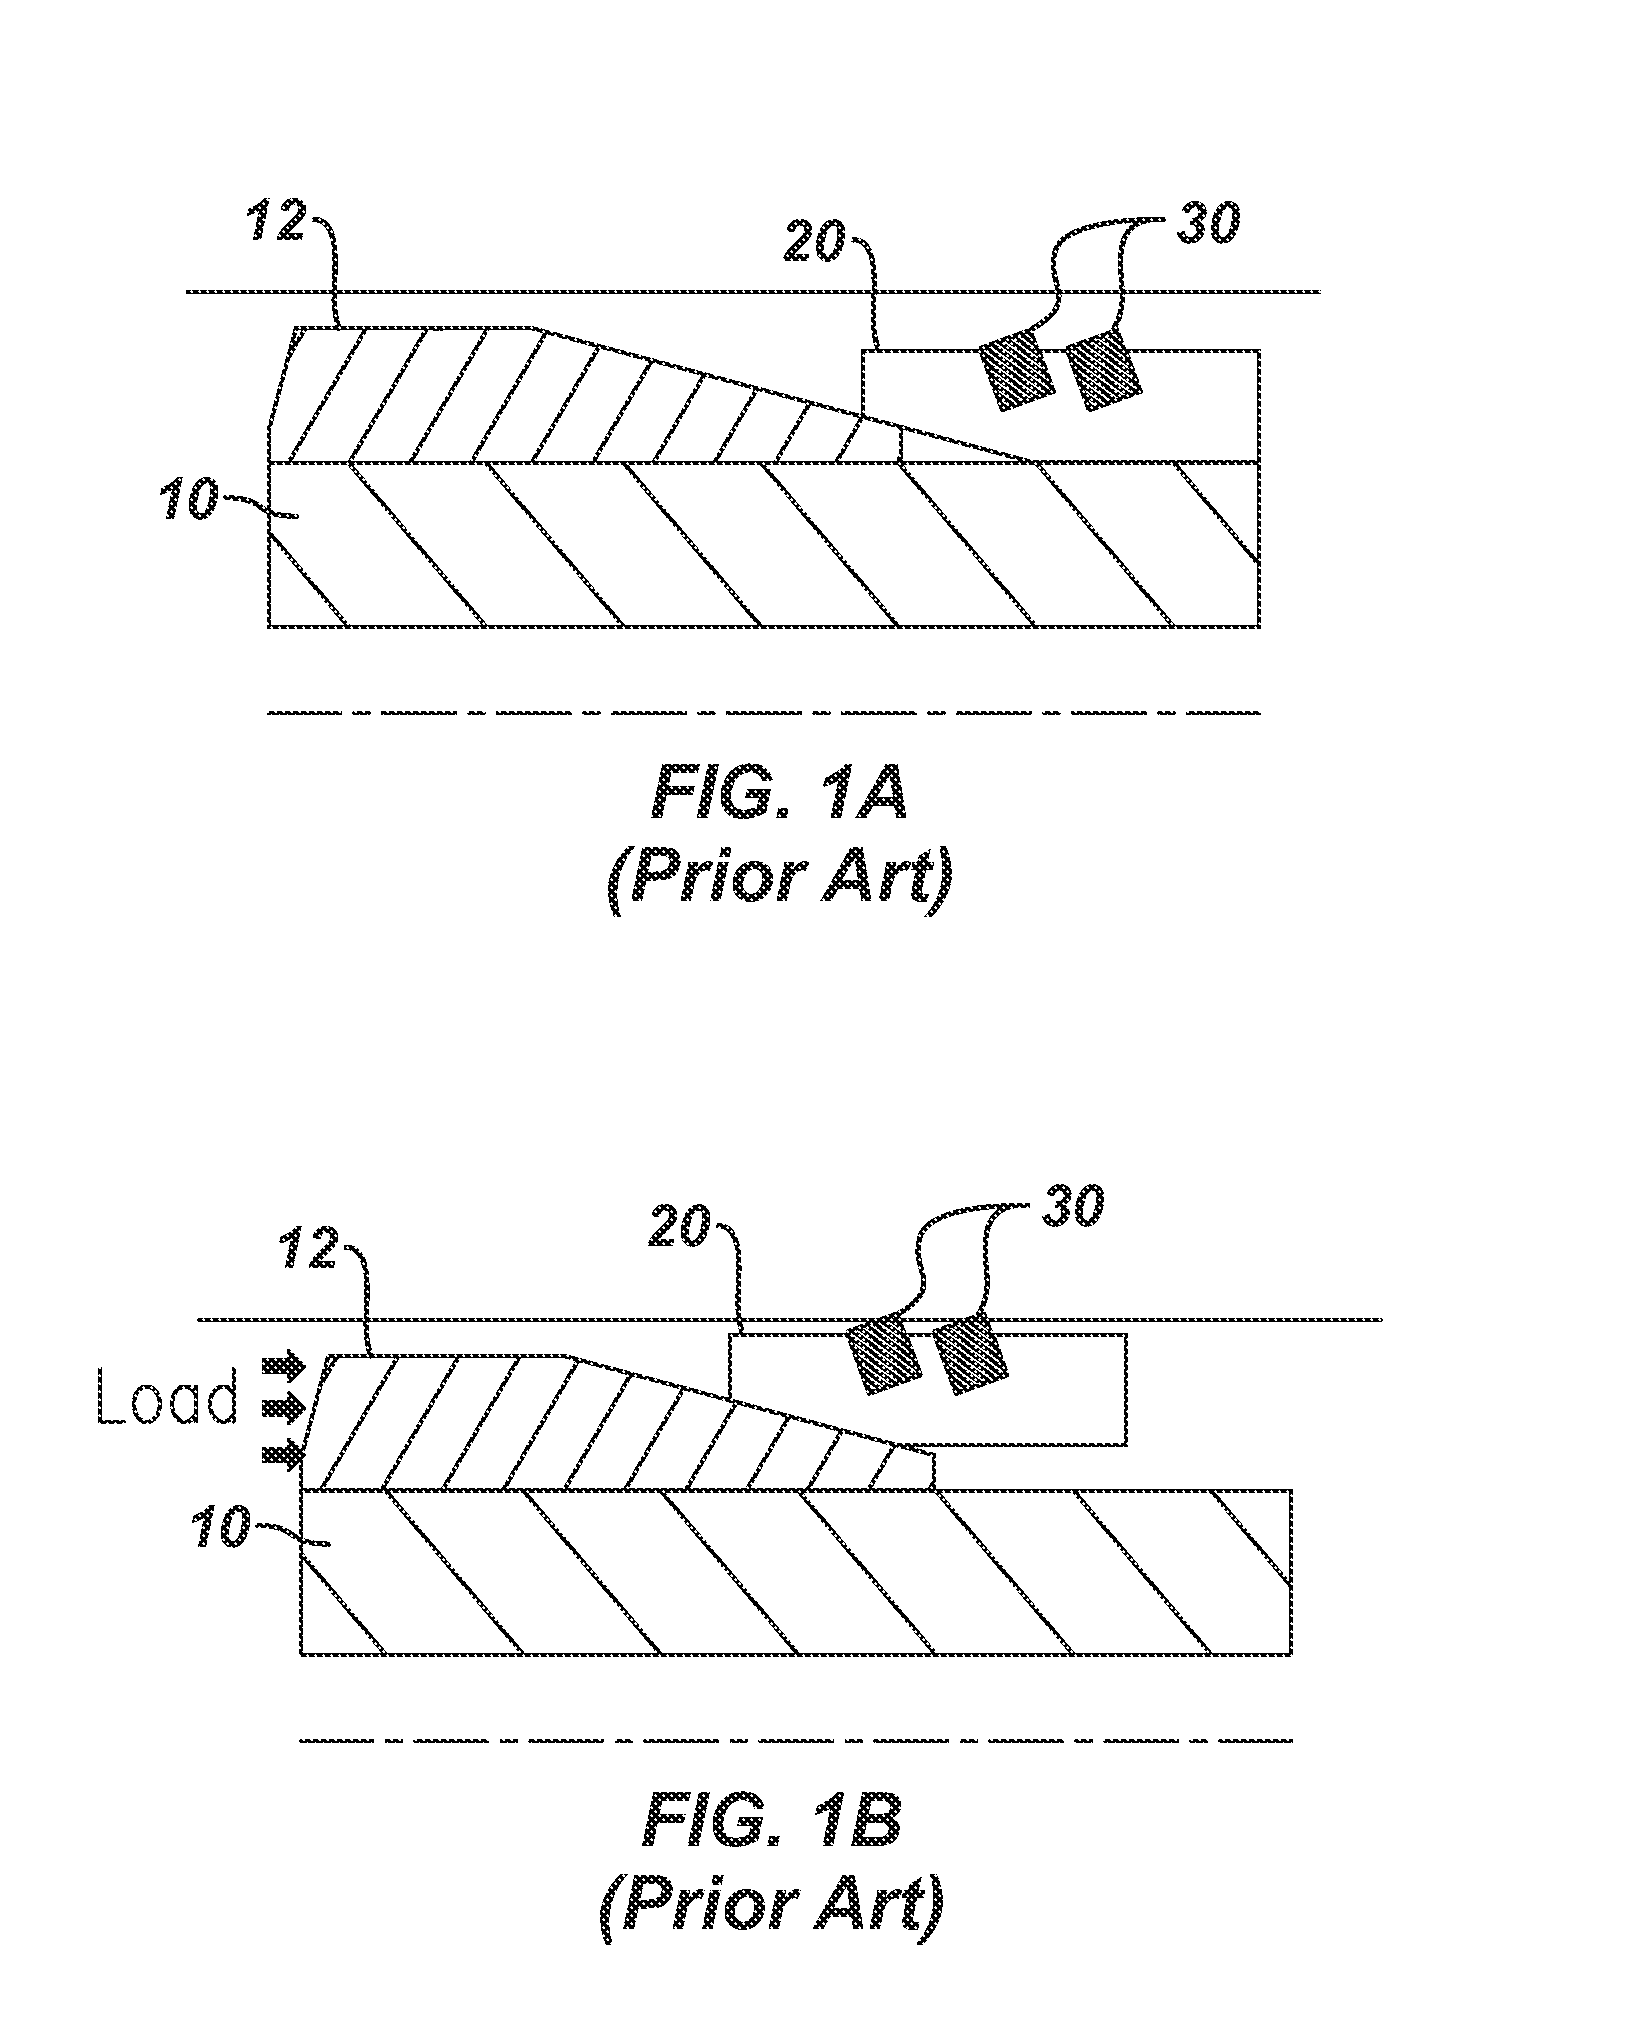 Inserts Having Geometrically Separate Materials for Slips on Downhole Tool